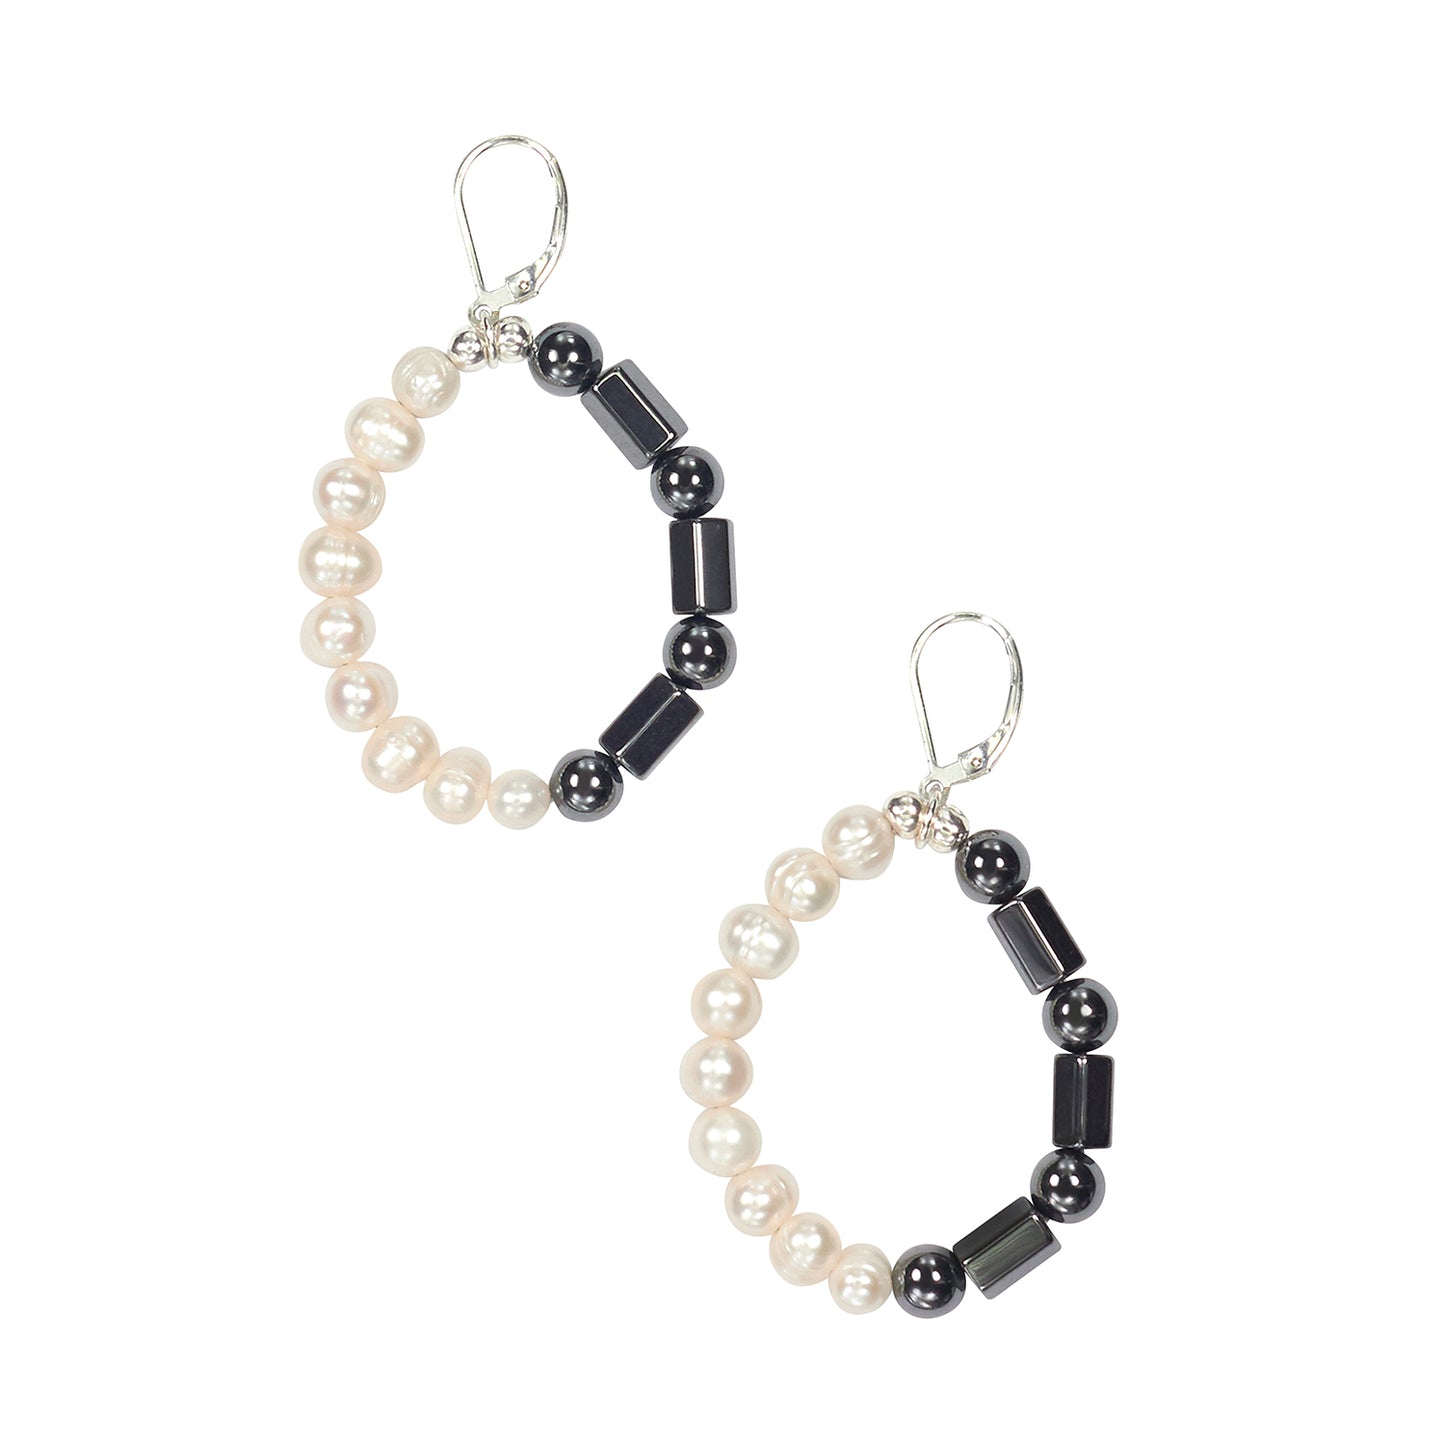 Large Hoop Earrings with Freshwater Pearls and Hematine